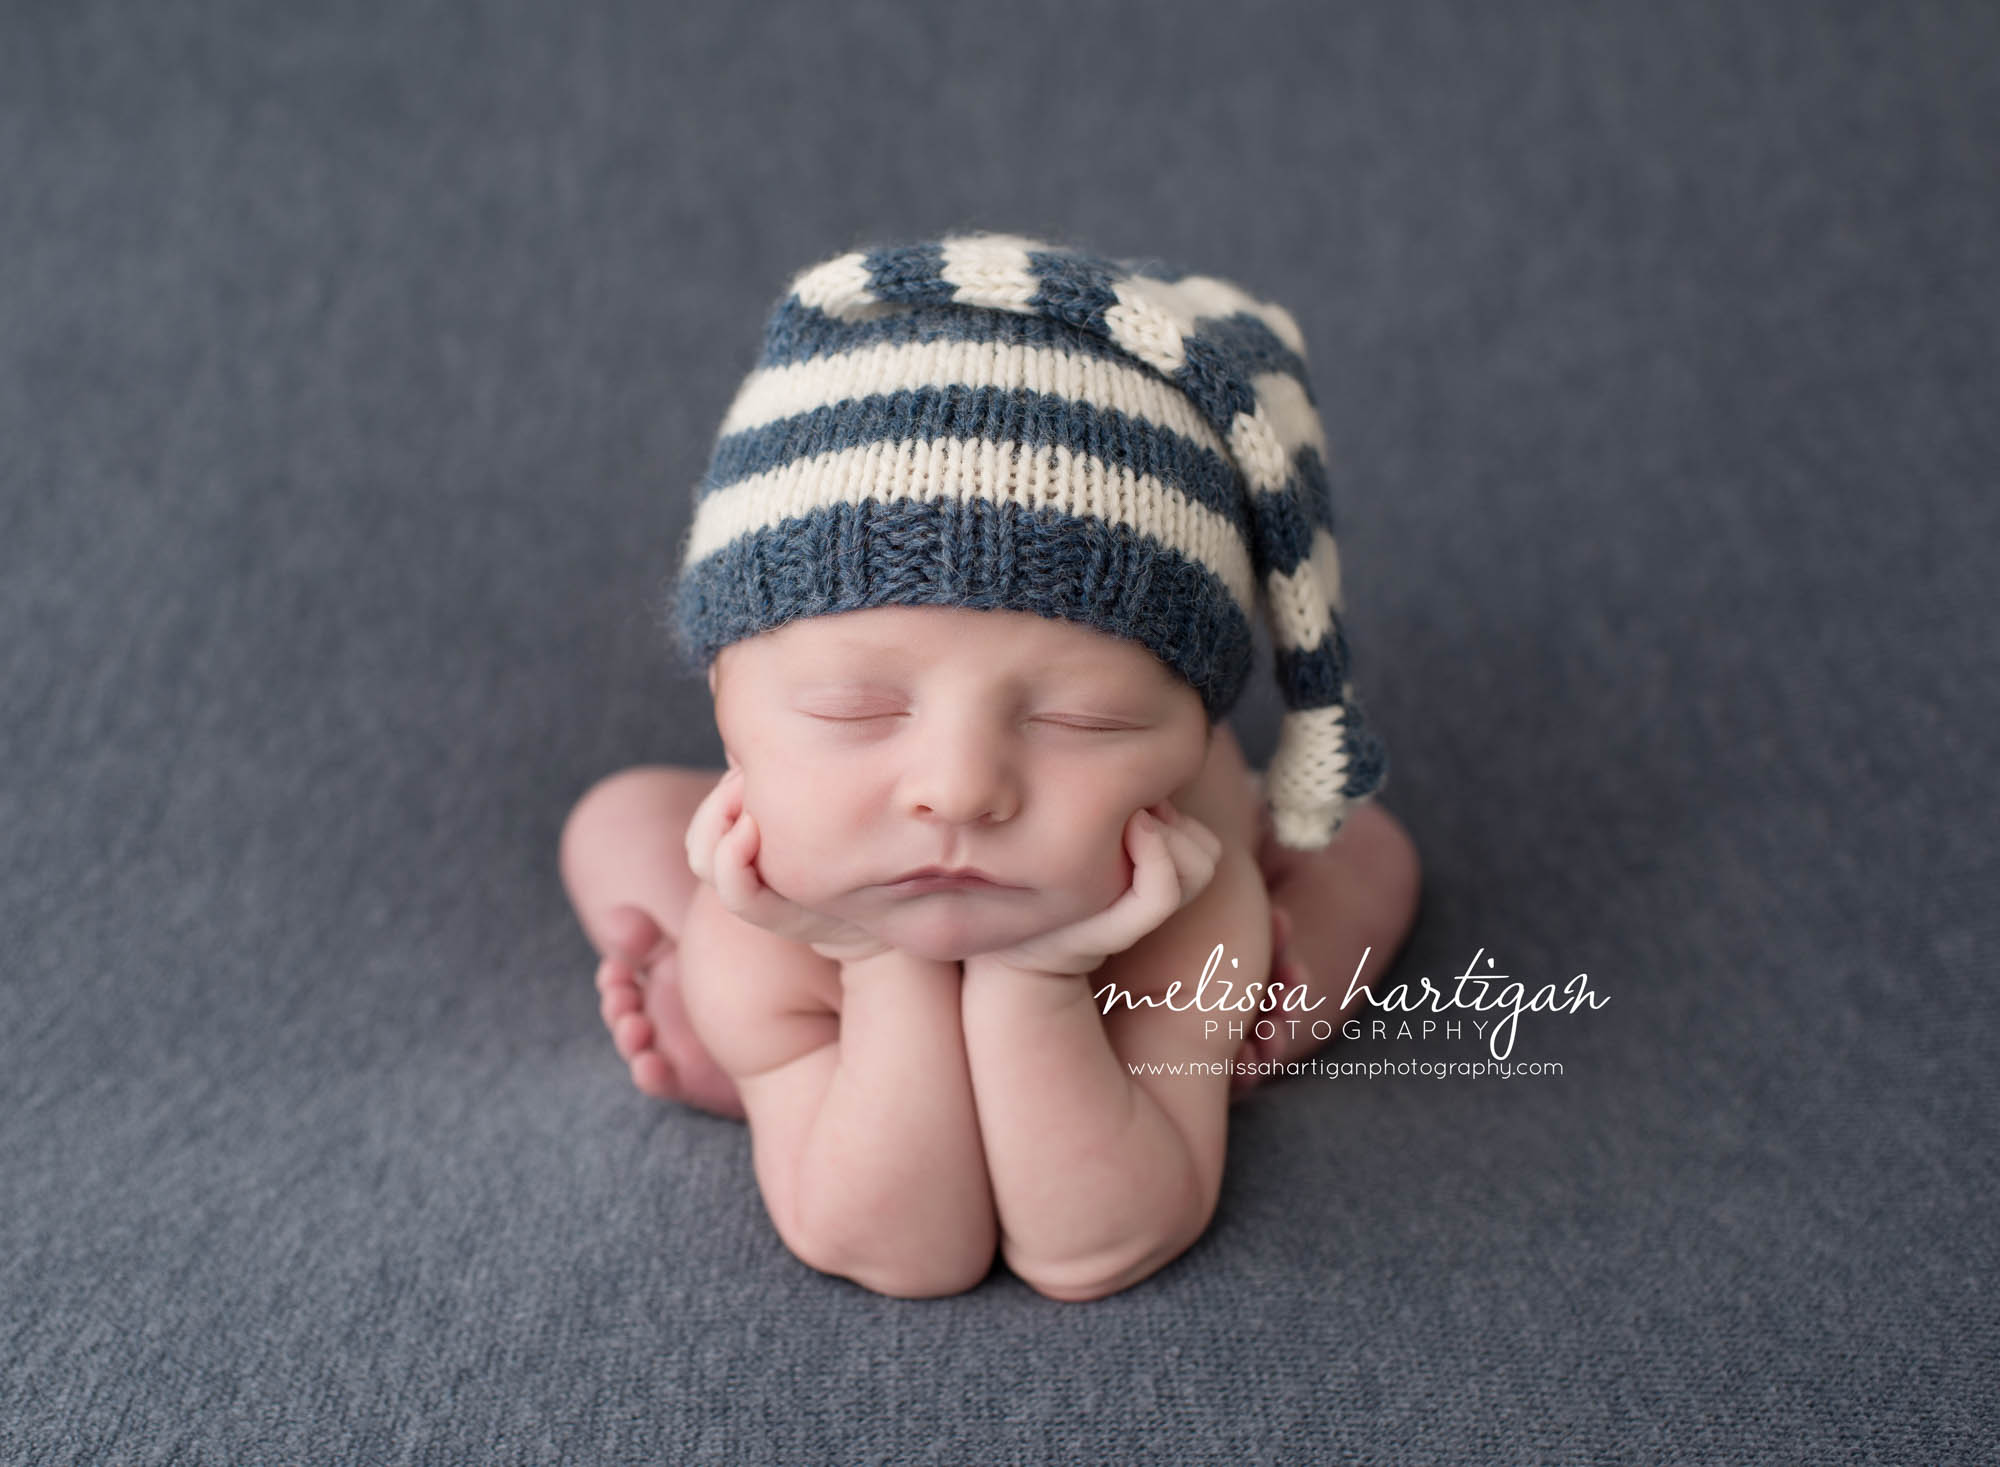 Melissa Hartigan Photography Coventry CT Newborn & Maternity Photographer Coventry CT Maternity Newborn Session Chase wearing striped blue and cream knit hat in froggy pose